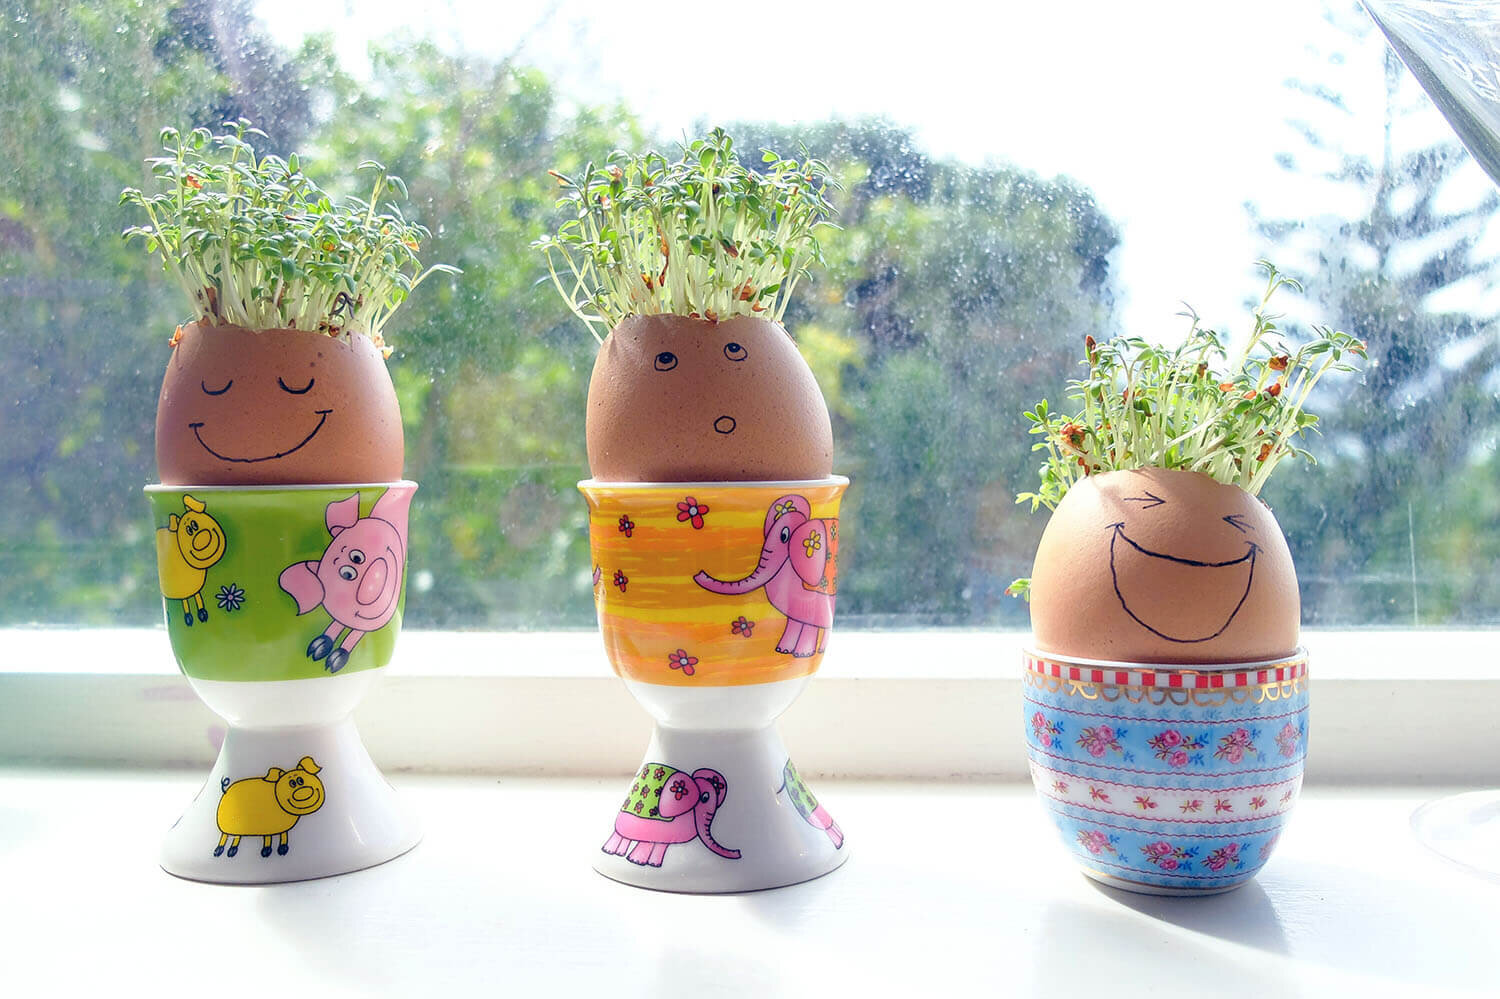 How to Grow Your Own Cress Egg Heads